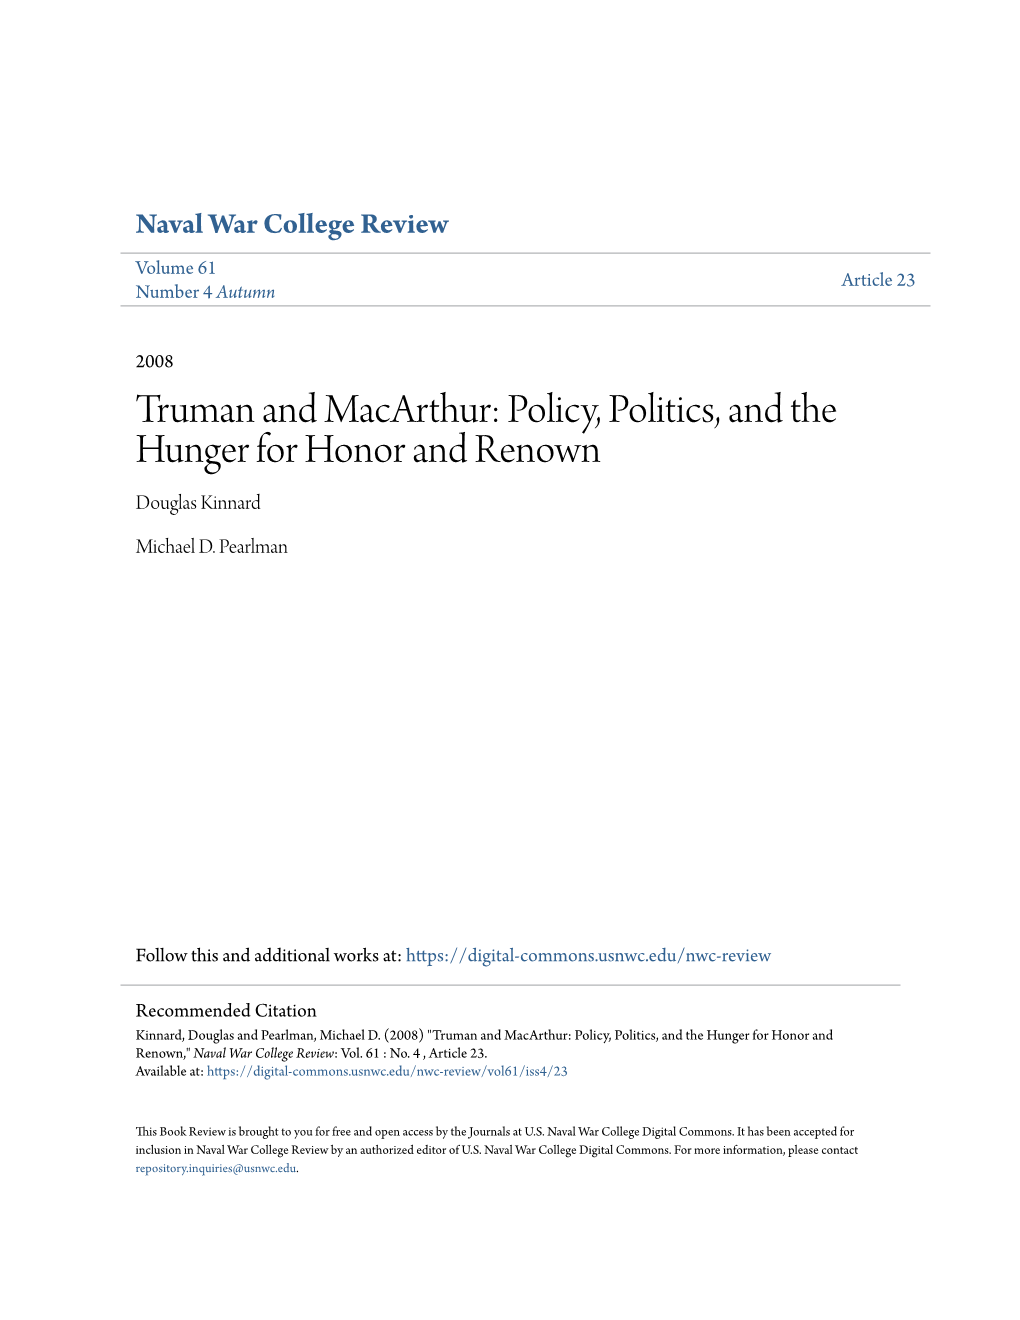 Truman and Macarthur: Policy, Politics, and the Hunger for Honor and Renown Douglas Kinnard